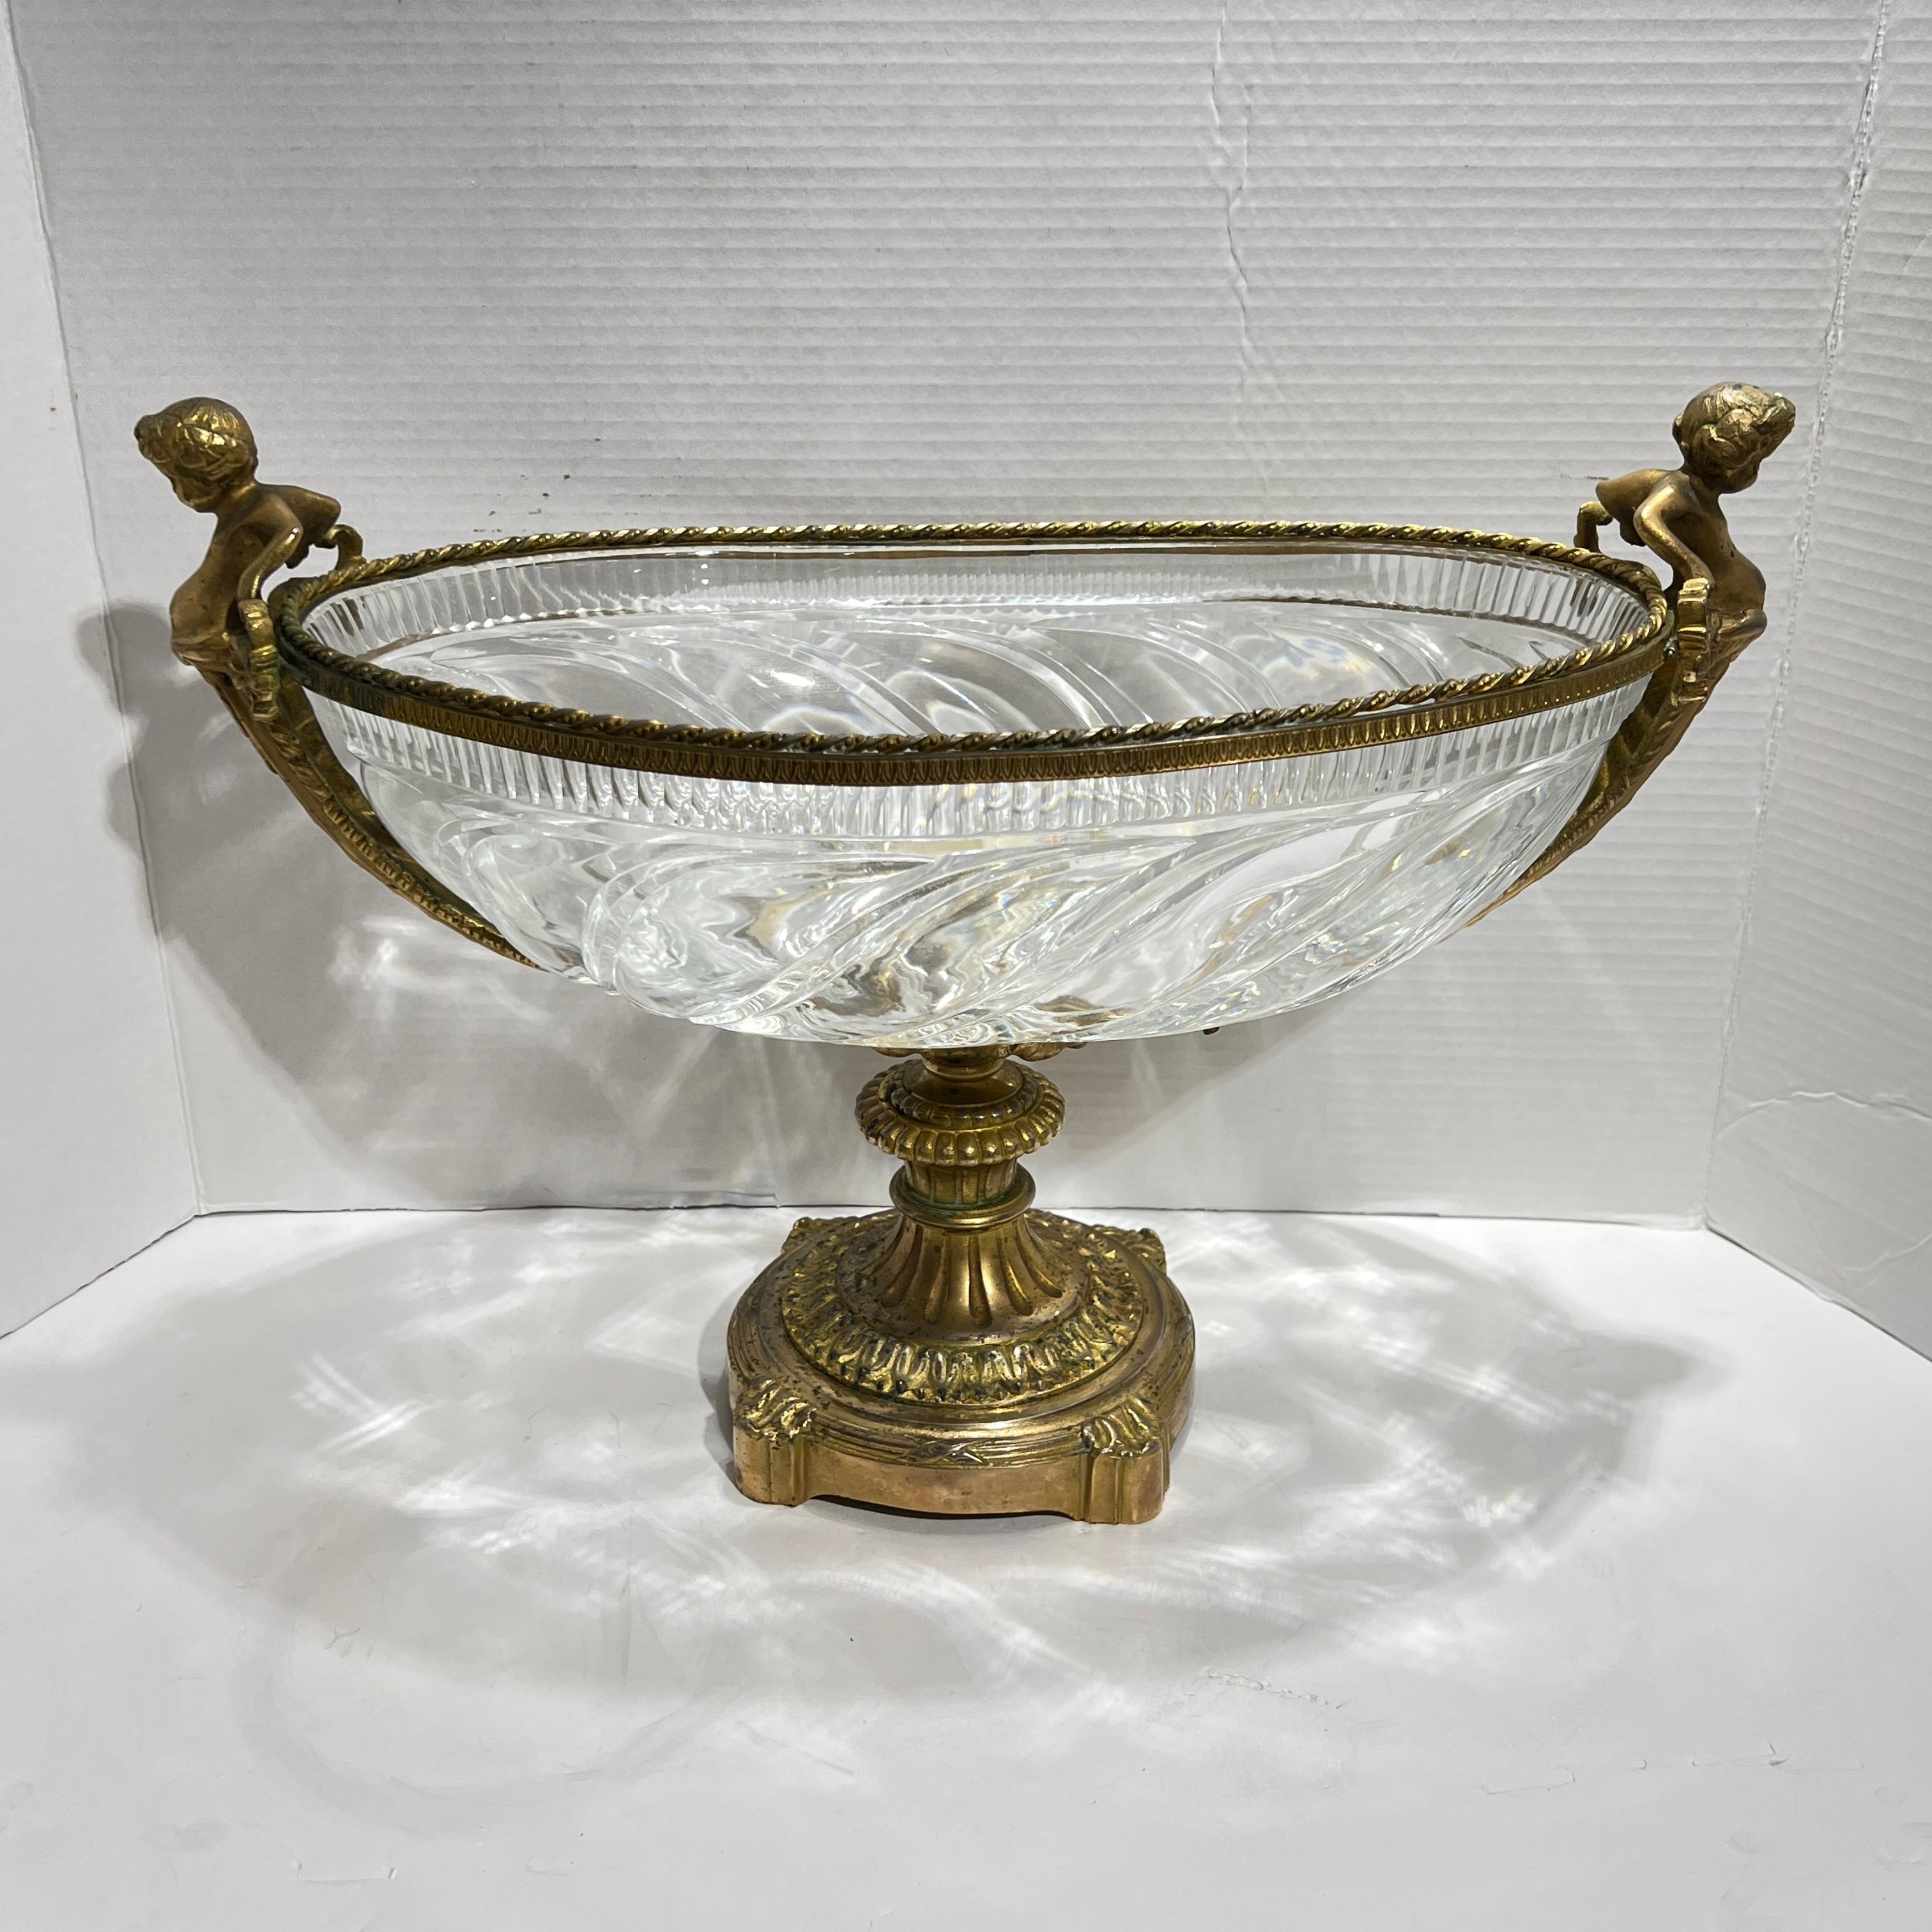 Baccarat style Gilt Bronze Mounted Crystal Glass Centerpiece Bowl 10